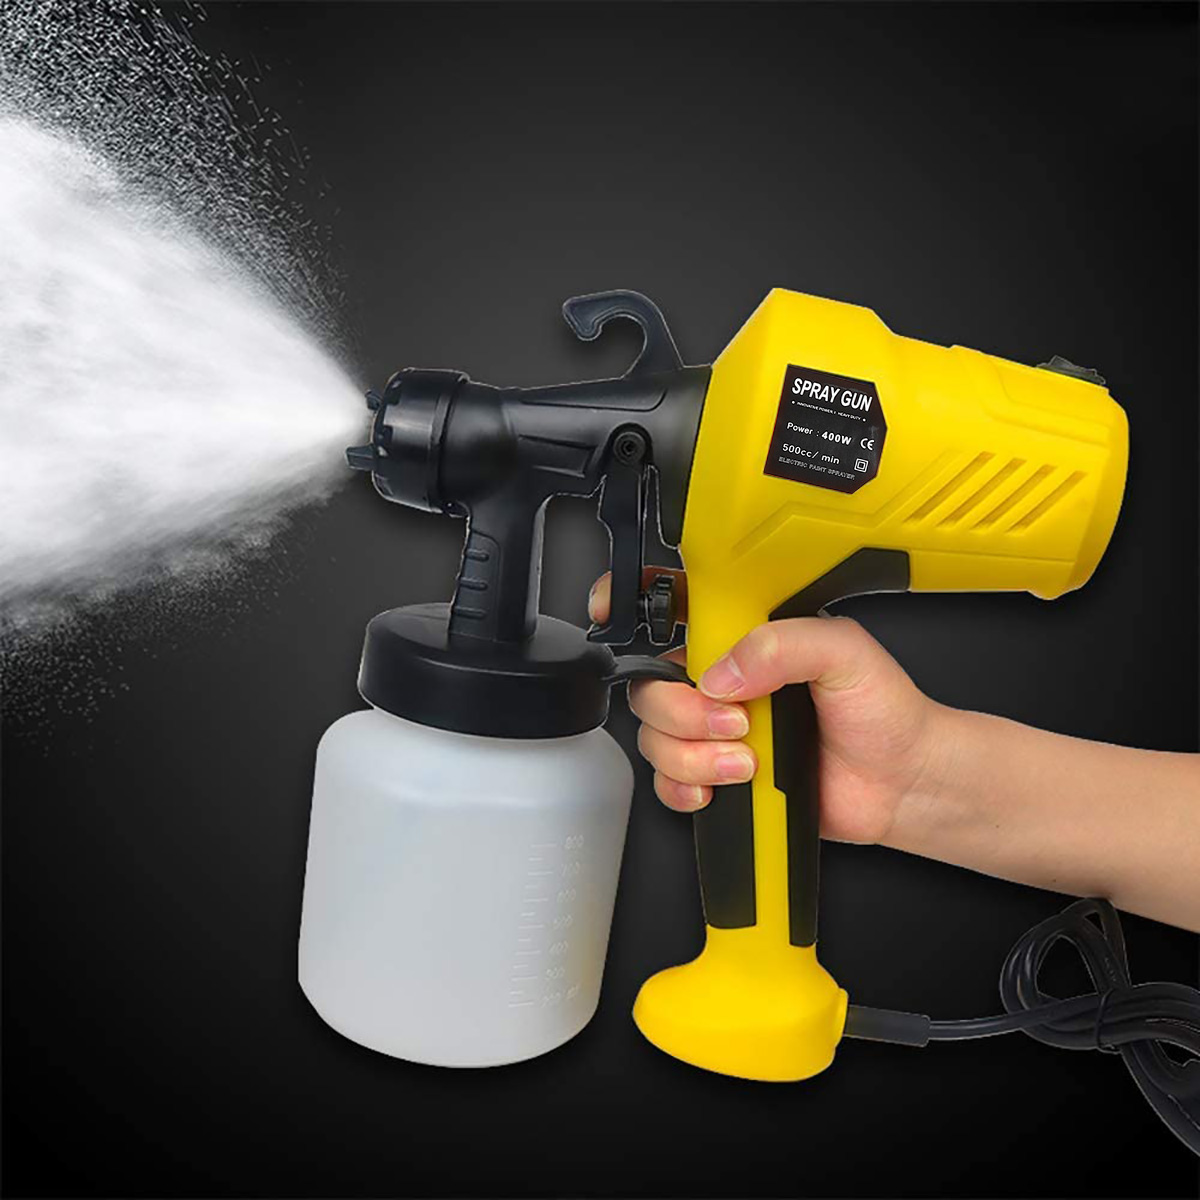 Electric-Spray-Gun-220V-Home-Electric-Paint-Sprayer-Easy-Spraying-Cleaning-Perfect-for-Beginner-Desi-1886820-7